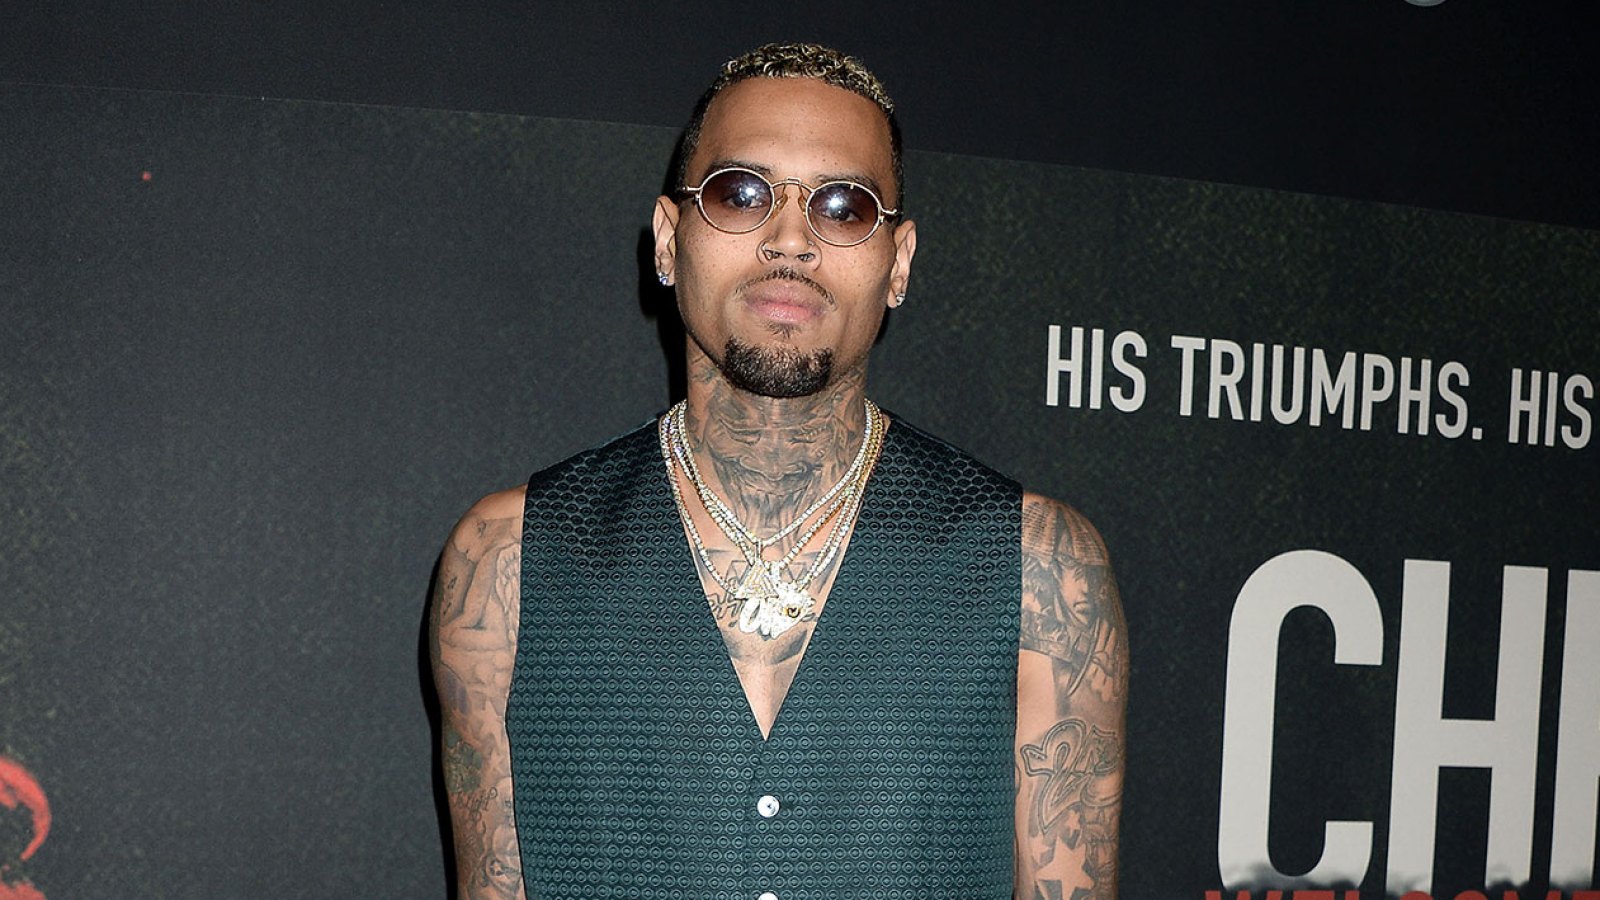 Chris Brown Wins Award at 2022 AMAs After Claiming His Performance Got Cut AMA American Music Awards 2022